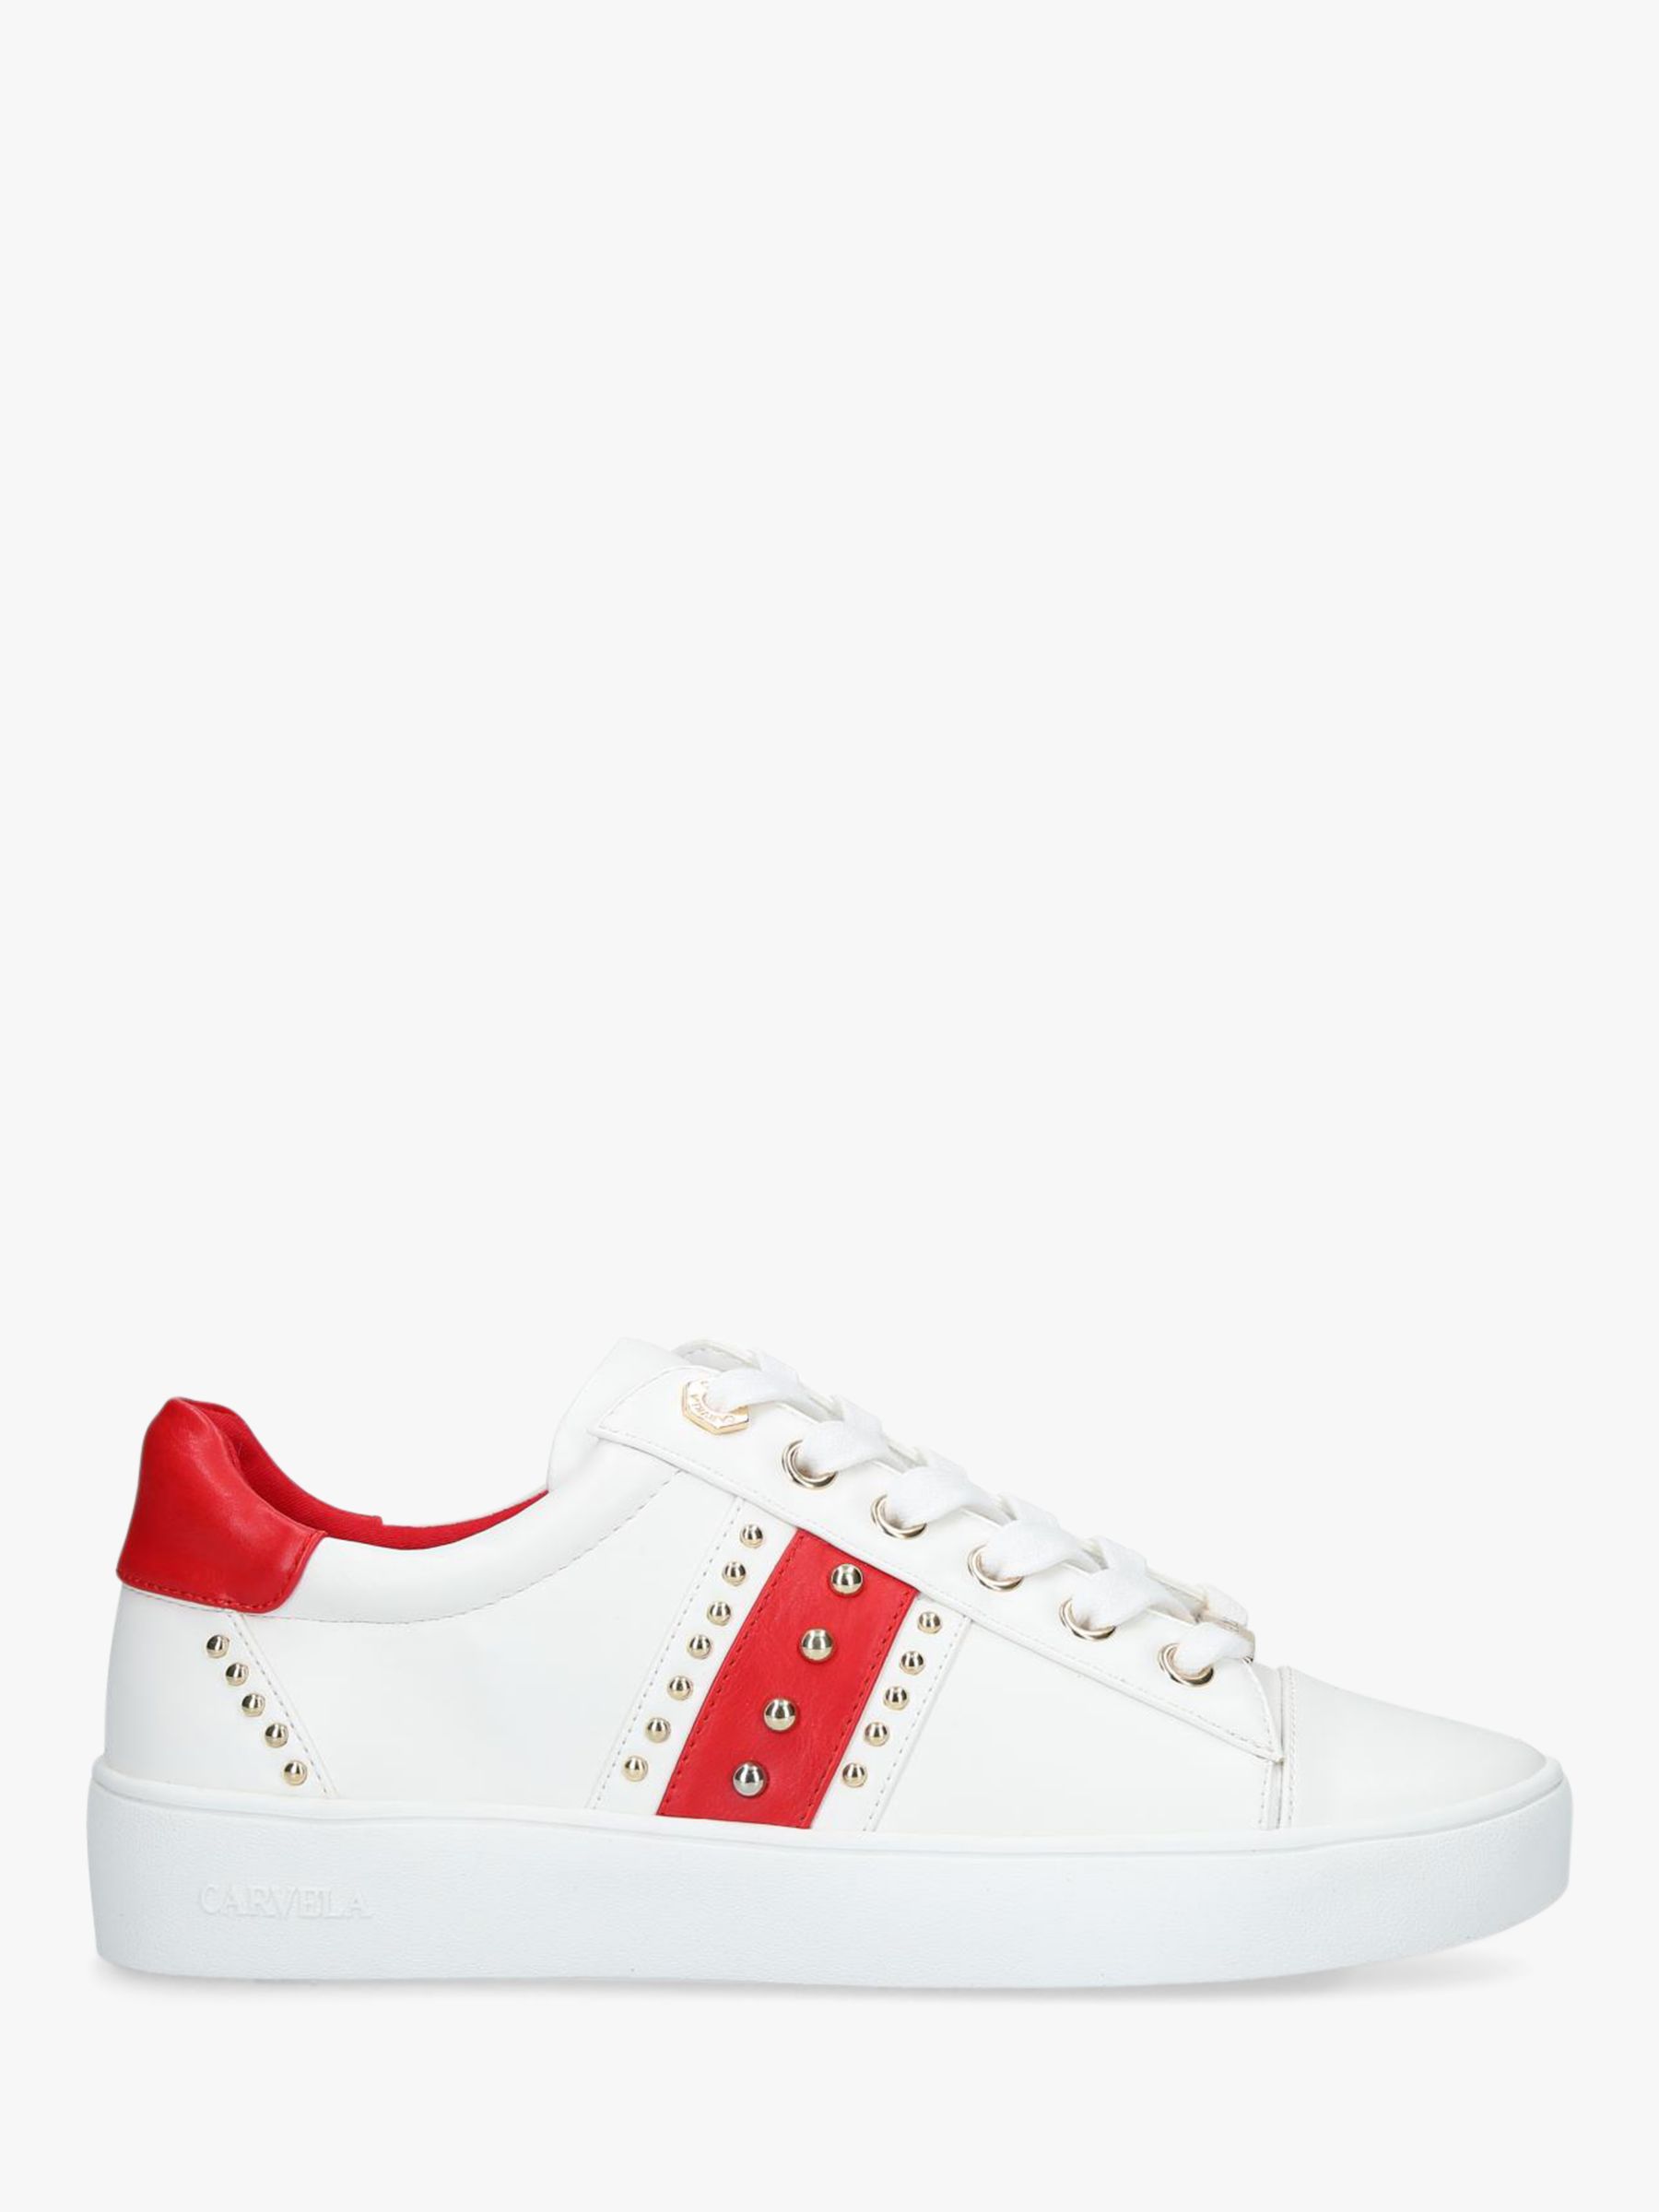 Carvela Jargon Studded Low Top Trainers, White/Red at John Lewis & Partners